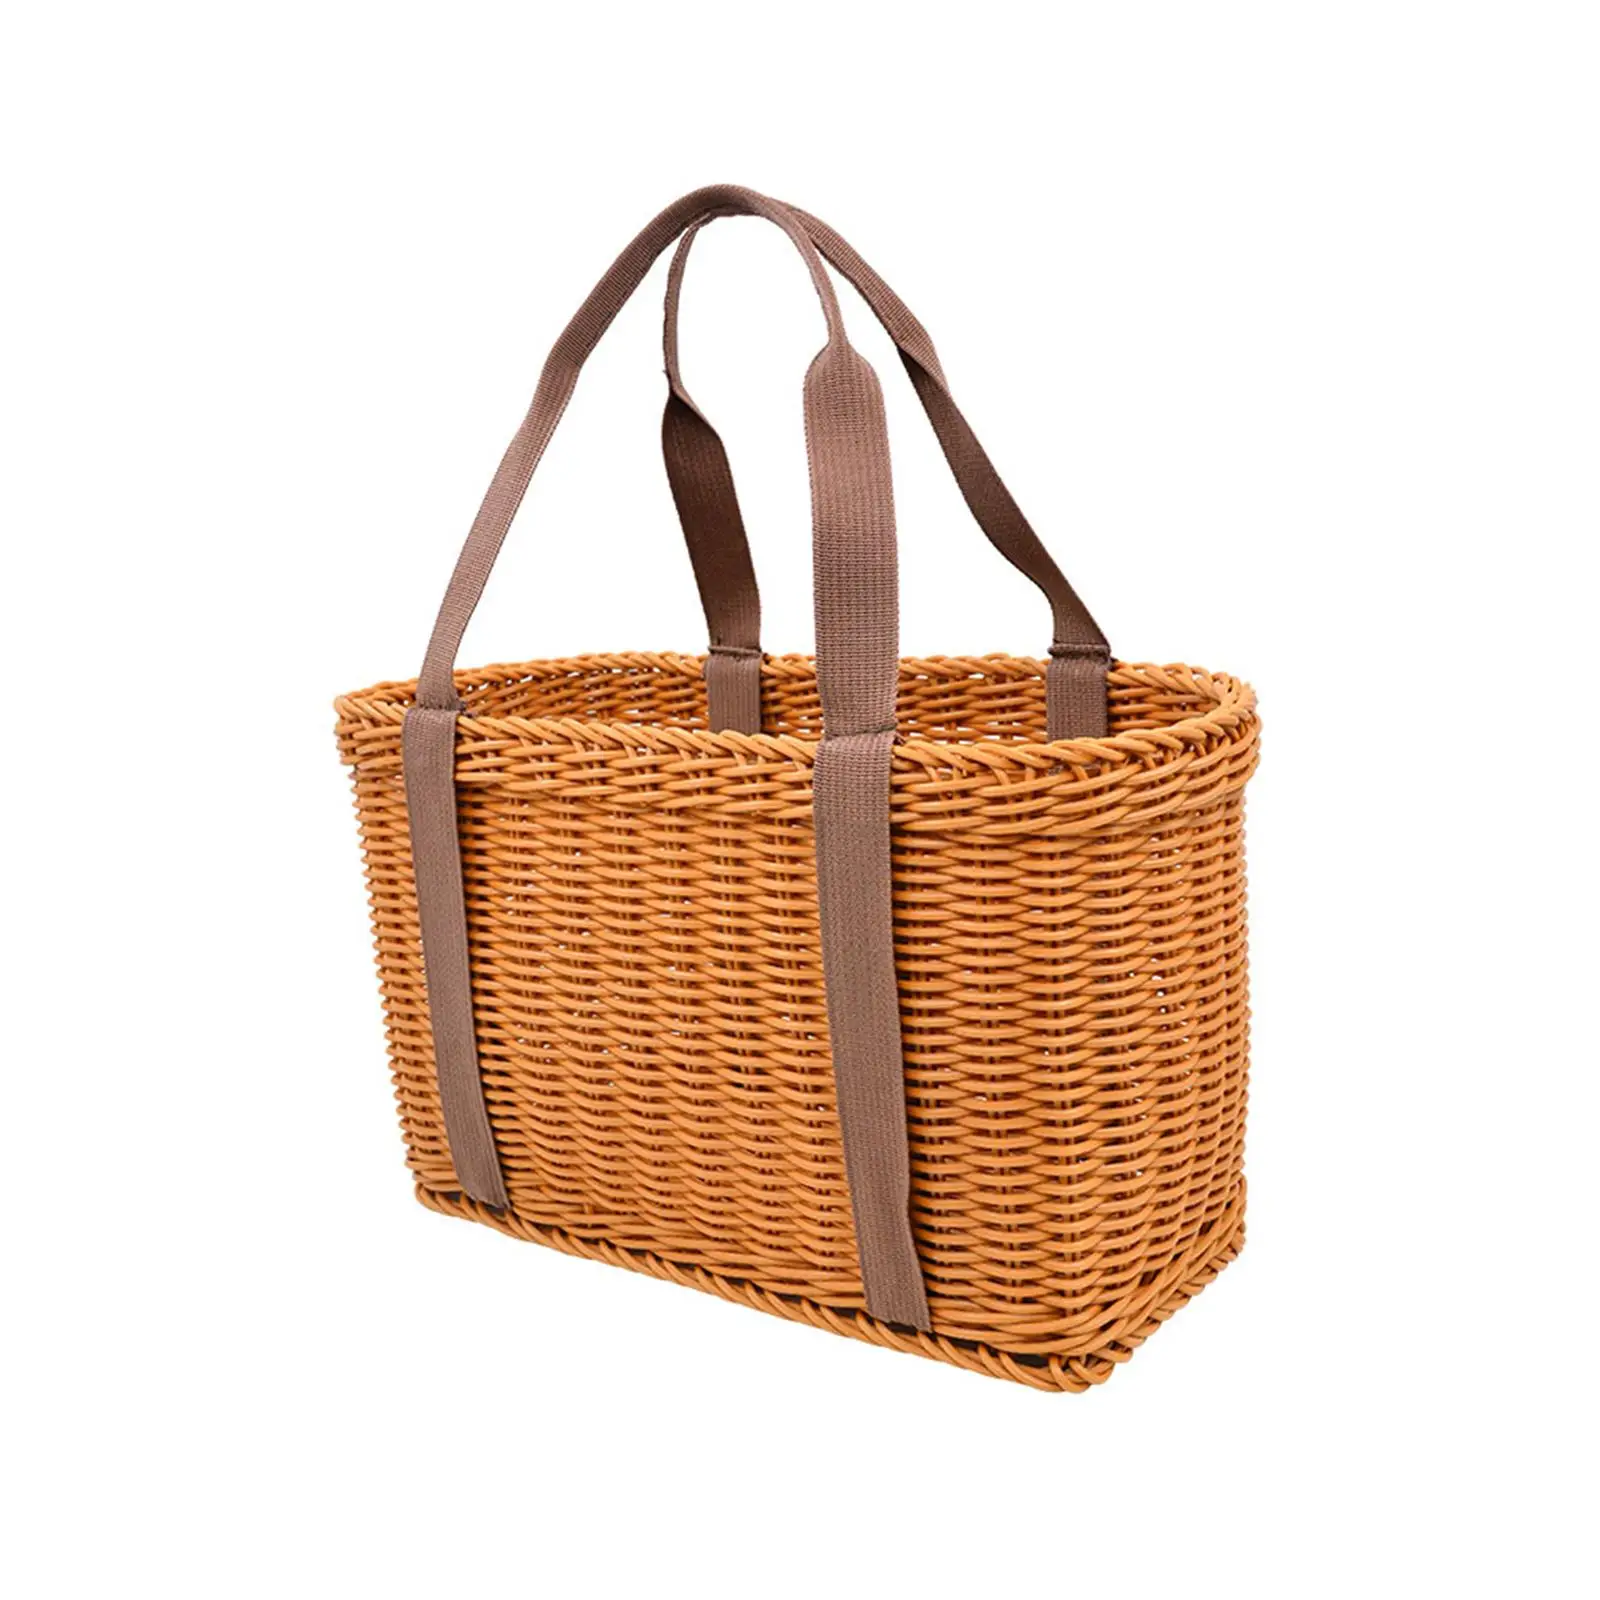 Woven Shopping Storage Basket Container Portable with Handle Multipurpose Market Basket Bag Picnic Basket for Outdoor Kitchen